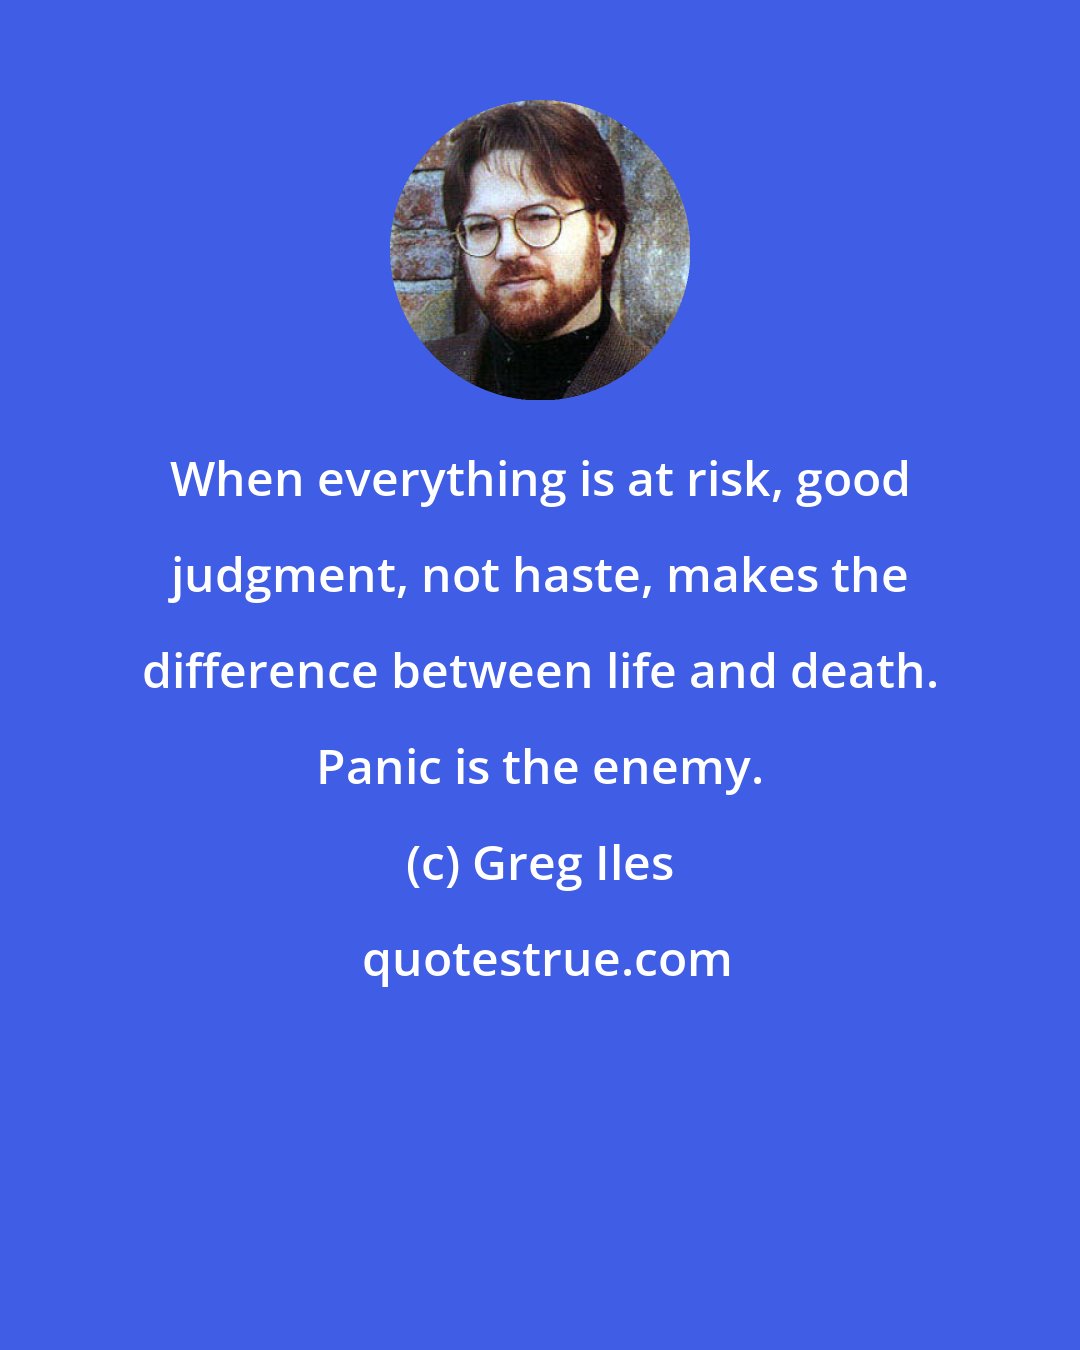 Greg Iles: When everything is at risk, good judgment, not haste, makes the difference between life and death. Panic is the enemy.